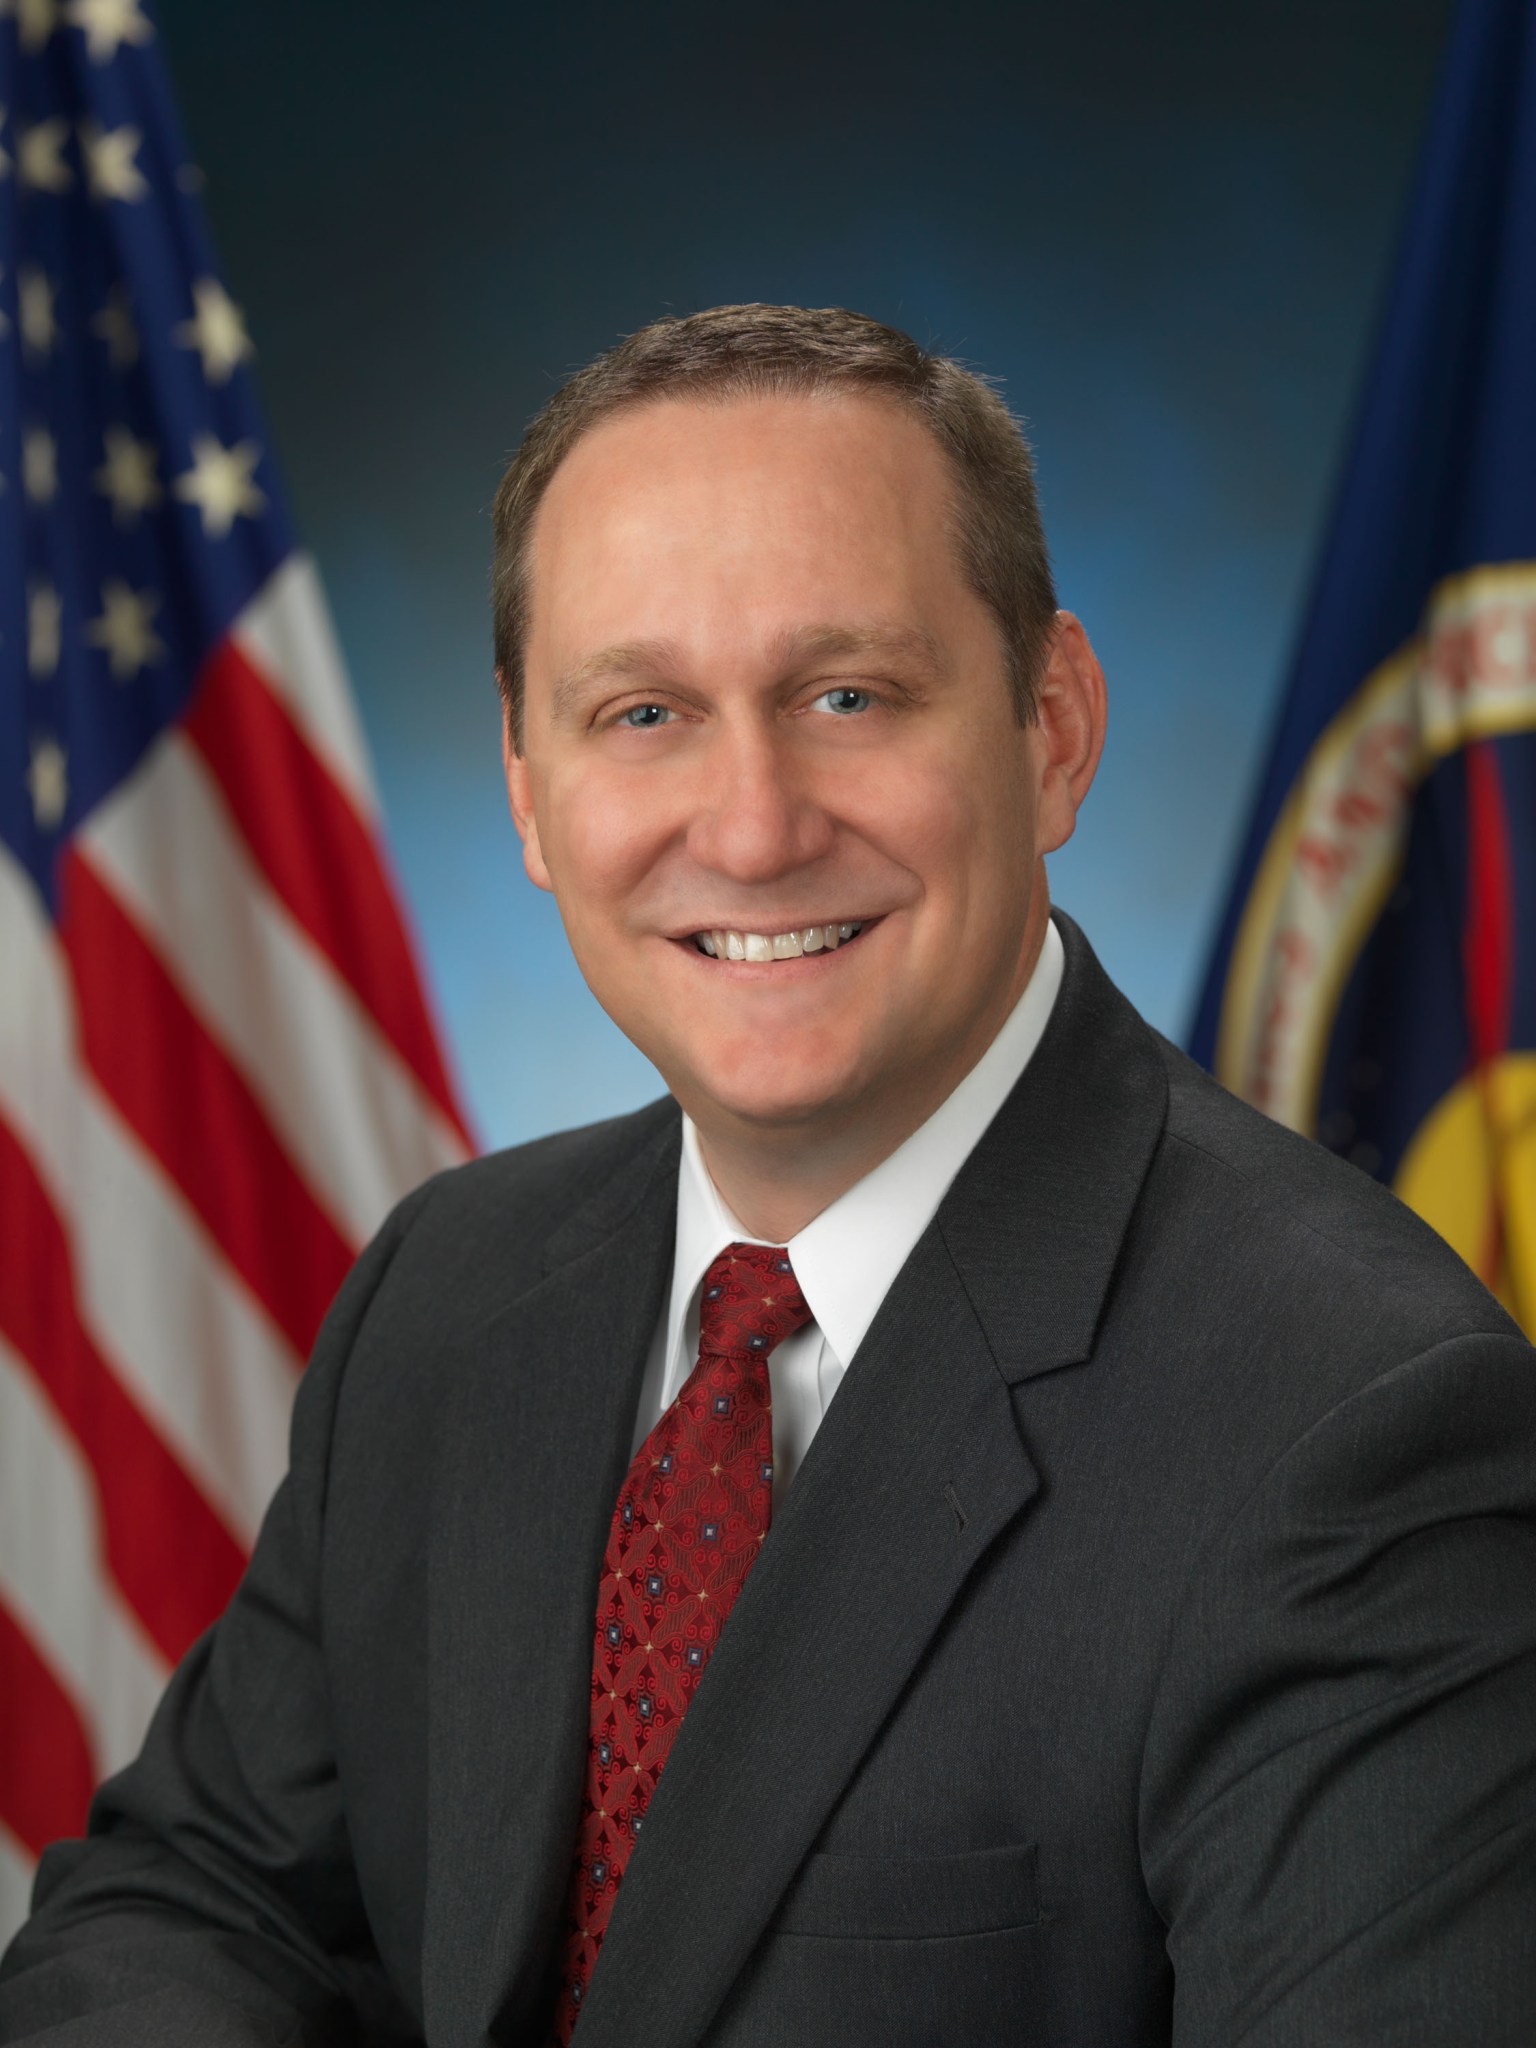 Portrait of Steve Rader wearing a black suit and red tie in front of a blue background. The American flag is to his right and the NASA flag is to his left.